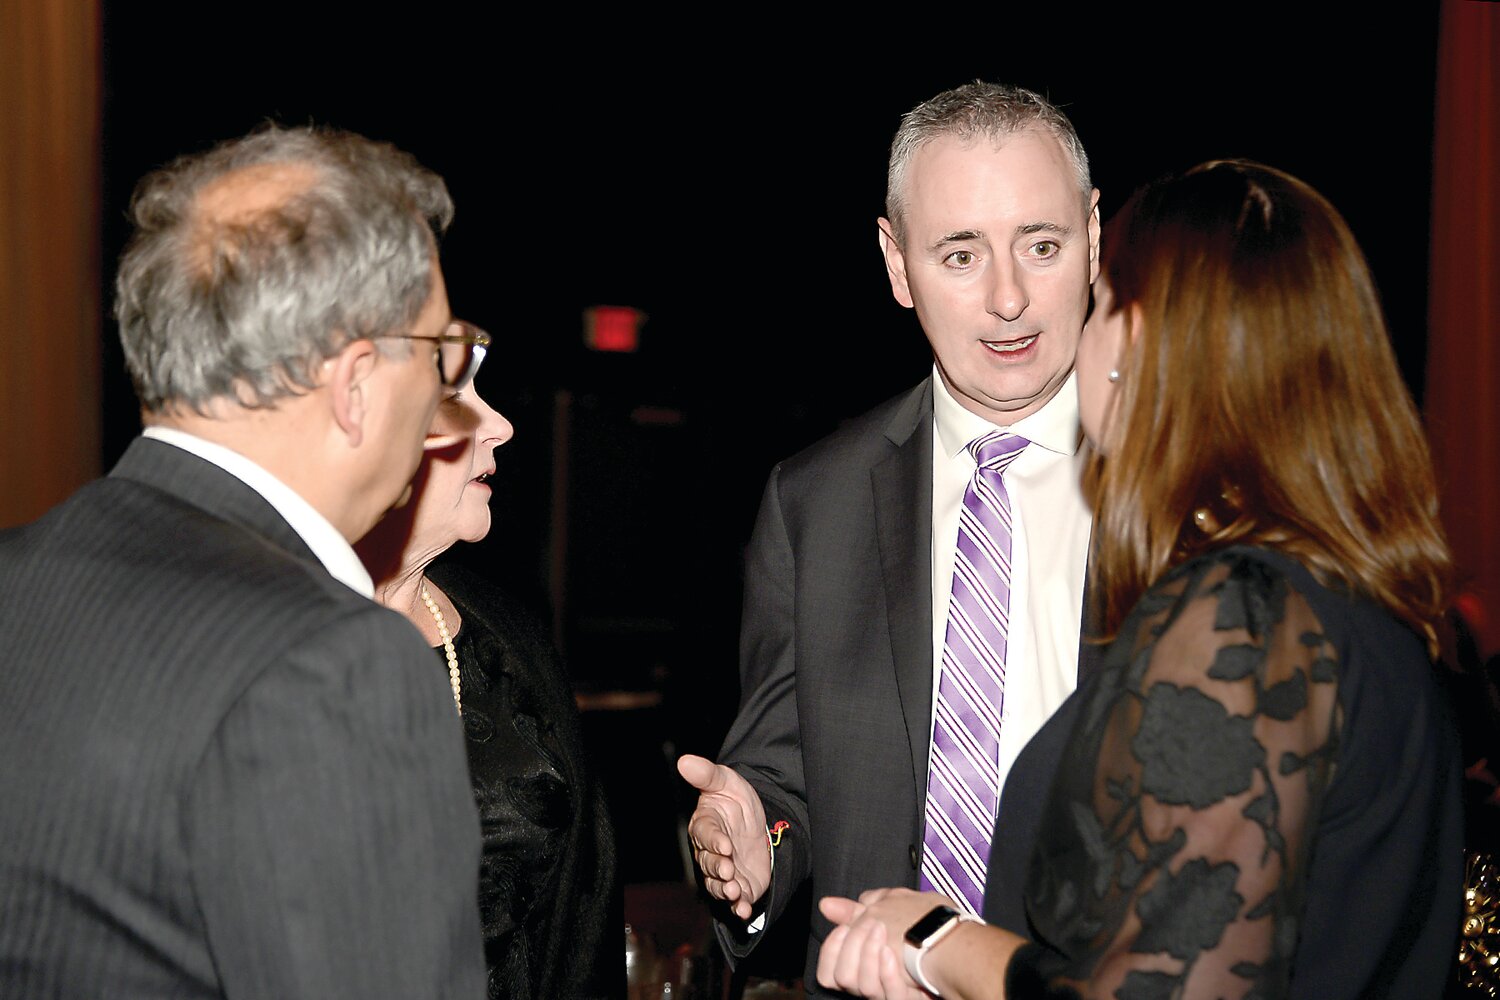 U.S. Rep. Brian Fitzpatrick speaks with other attendees at the Lower Bucks County Chamber of Commerce’s celebration of its 2023 Champions of Commerce award winners on Nov. 16 at The Fuge in Warminster.